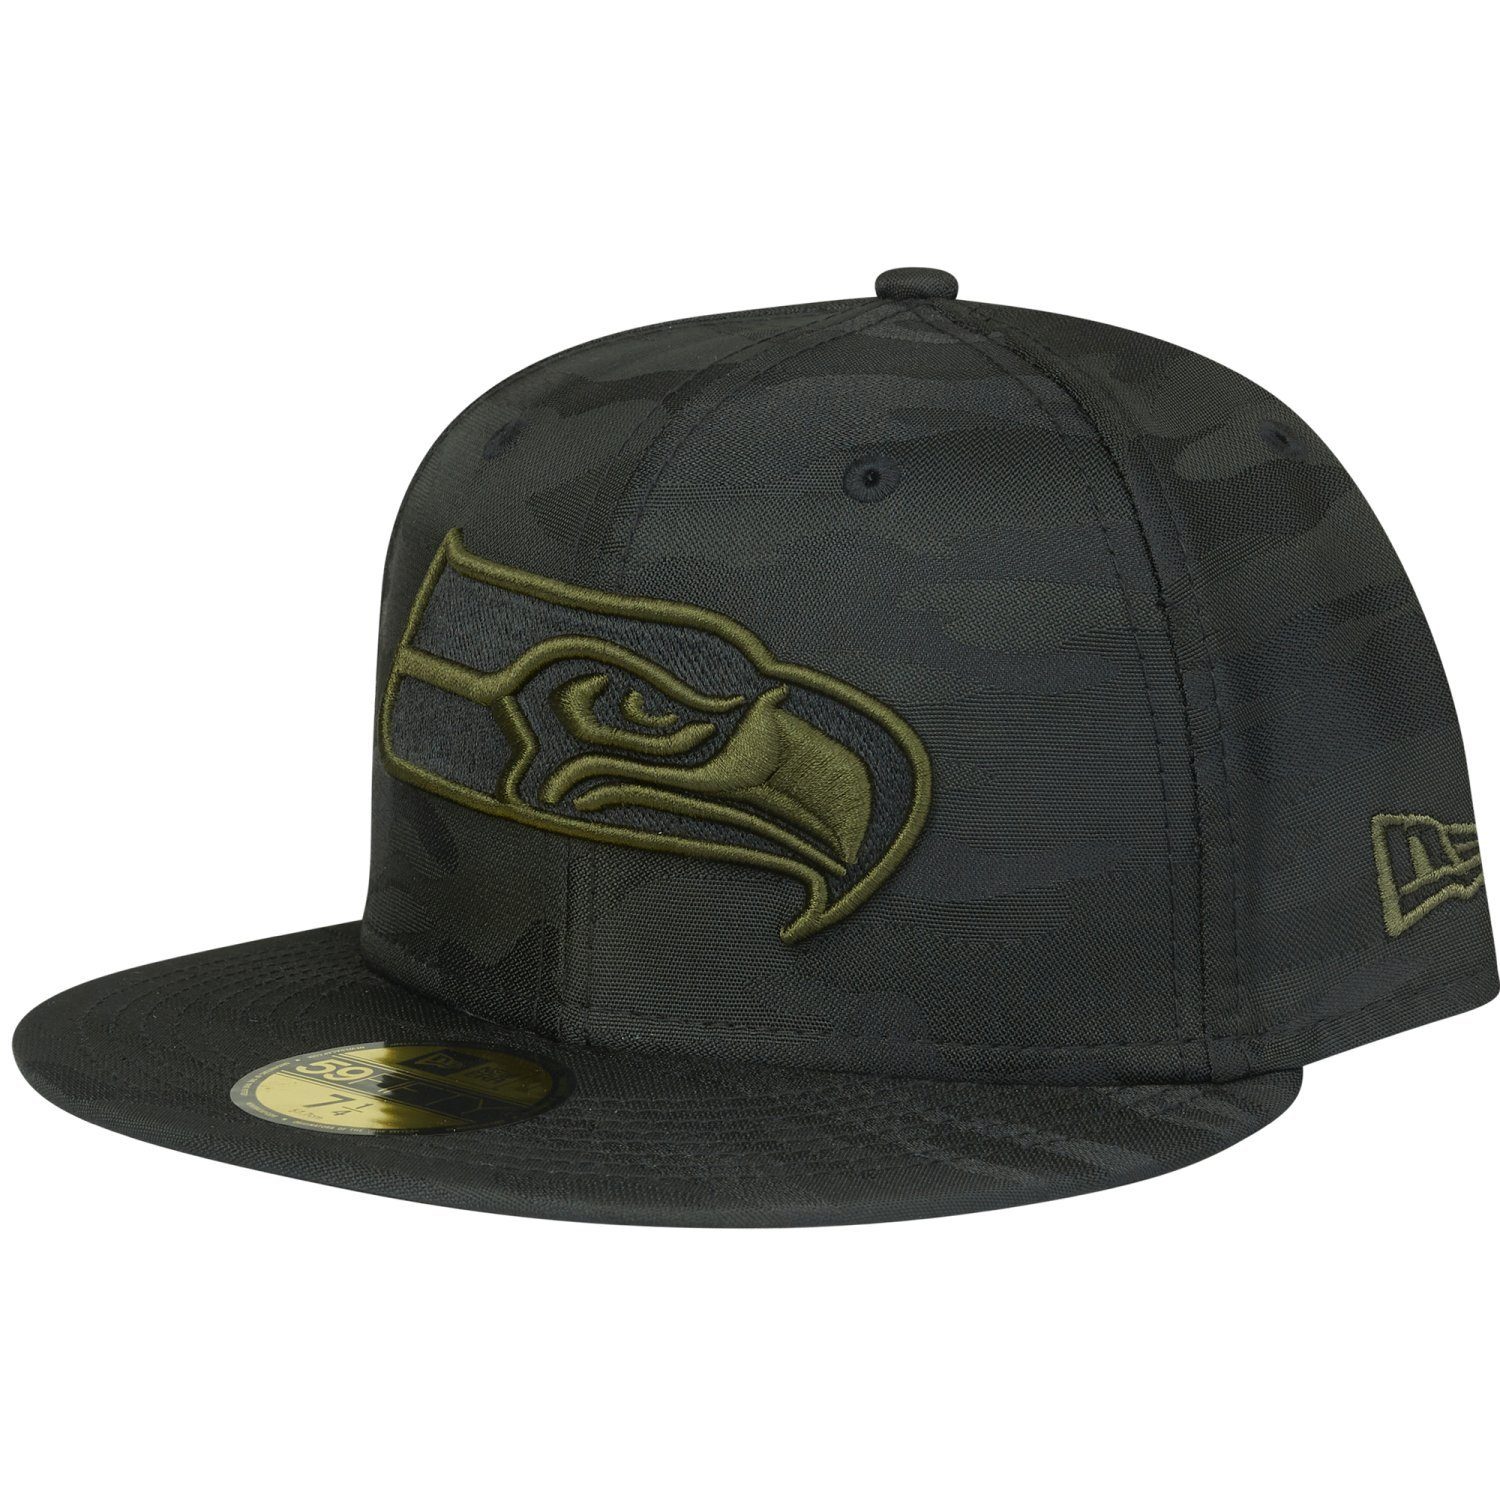 New Era Fitted Cap 59Fifty NFL TEAMS alpine Seattle Seahawks